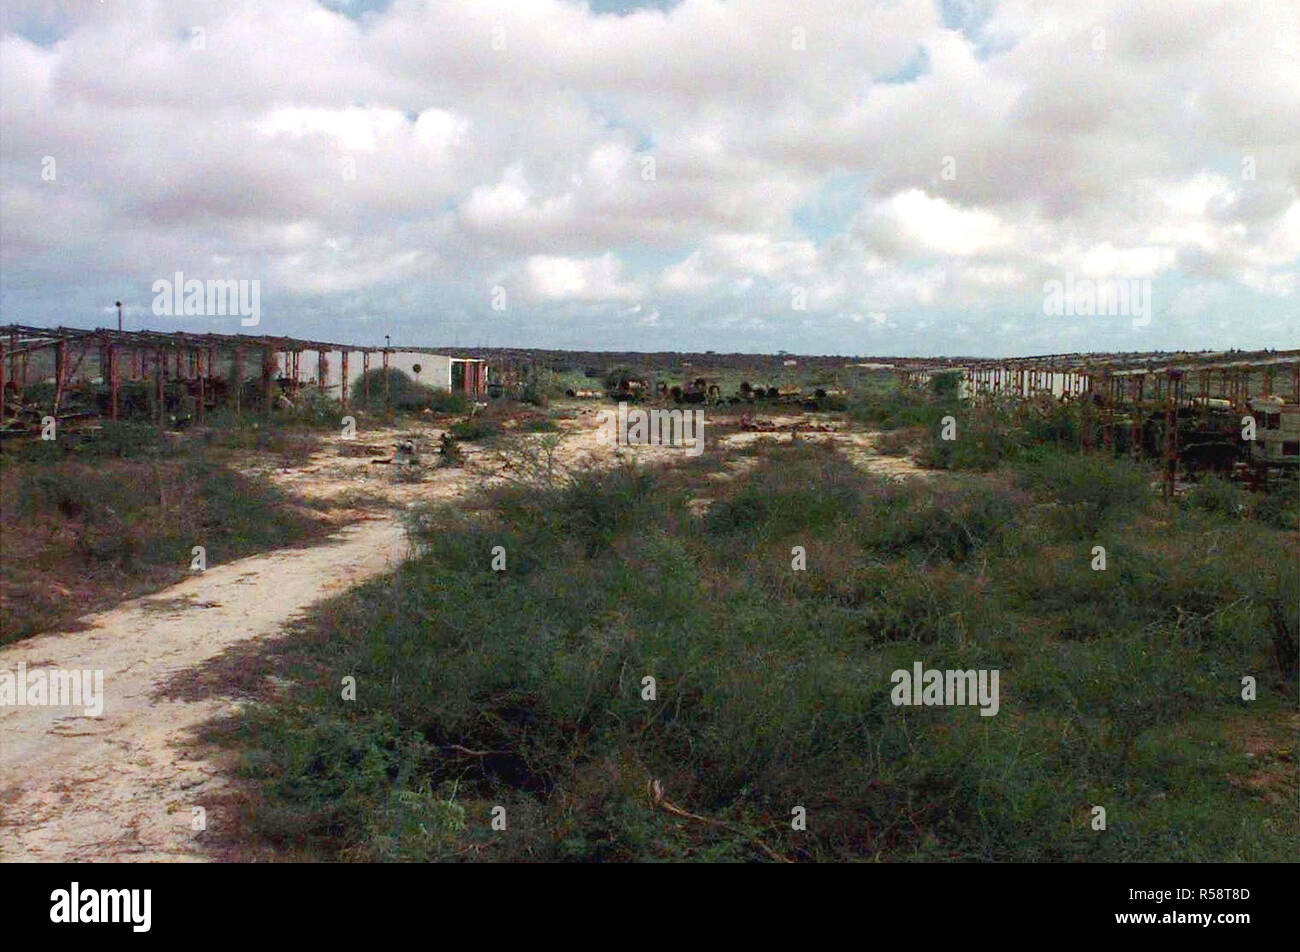 Panoramic view of the dilapidated vehicles and buildings from the abandoned Soviet Surface to Air Missile site north of Sword Base, outside of Mogadishu, Somalia.  The base is being prepared for destruction and this mission is in direct support of Operation Restore Hope. Stock Photo